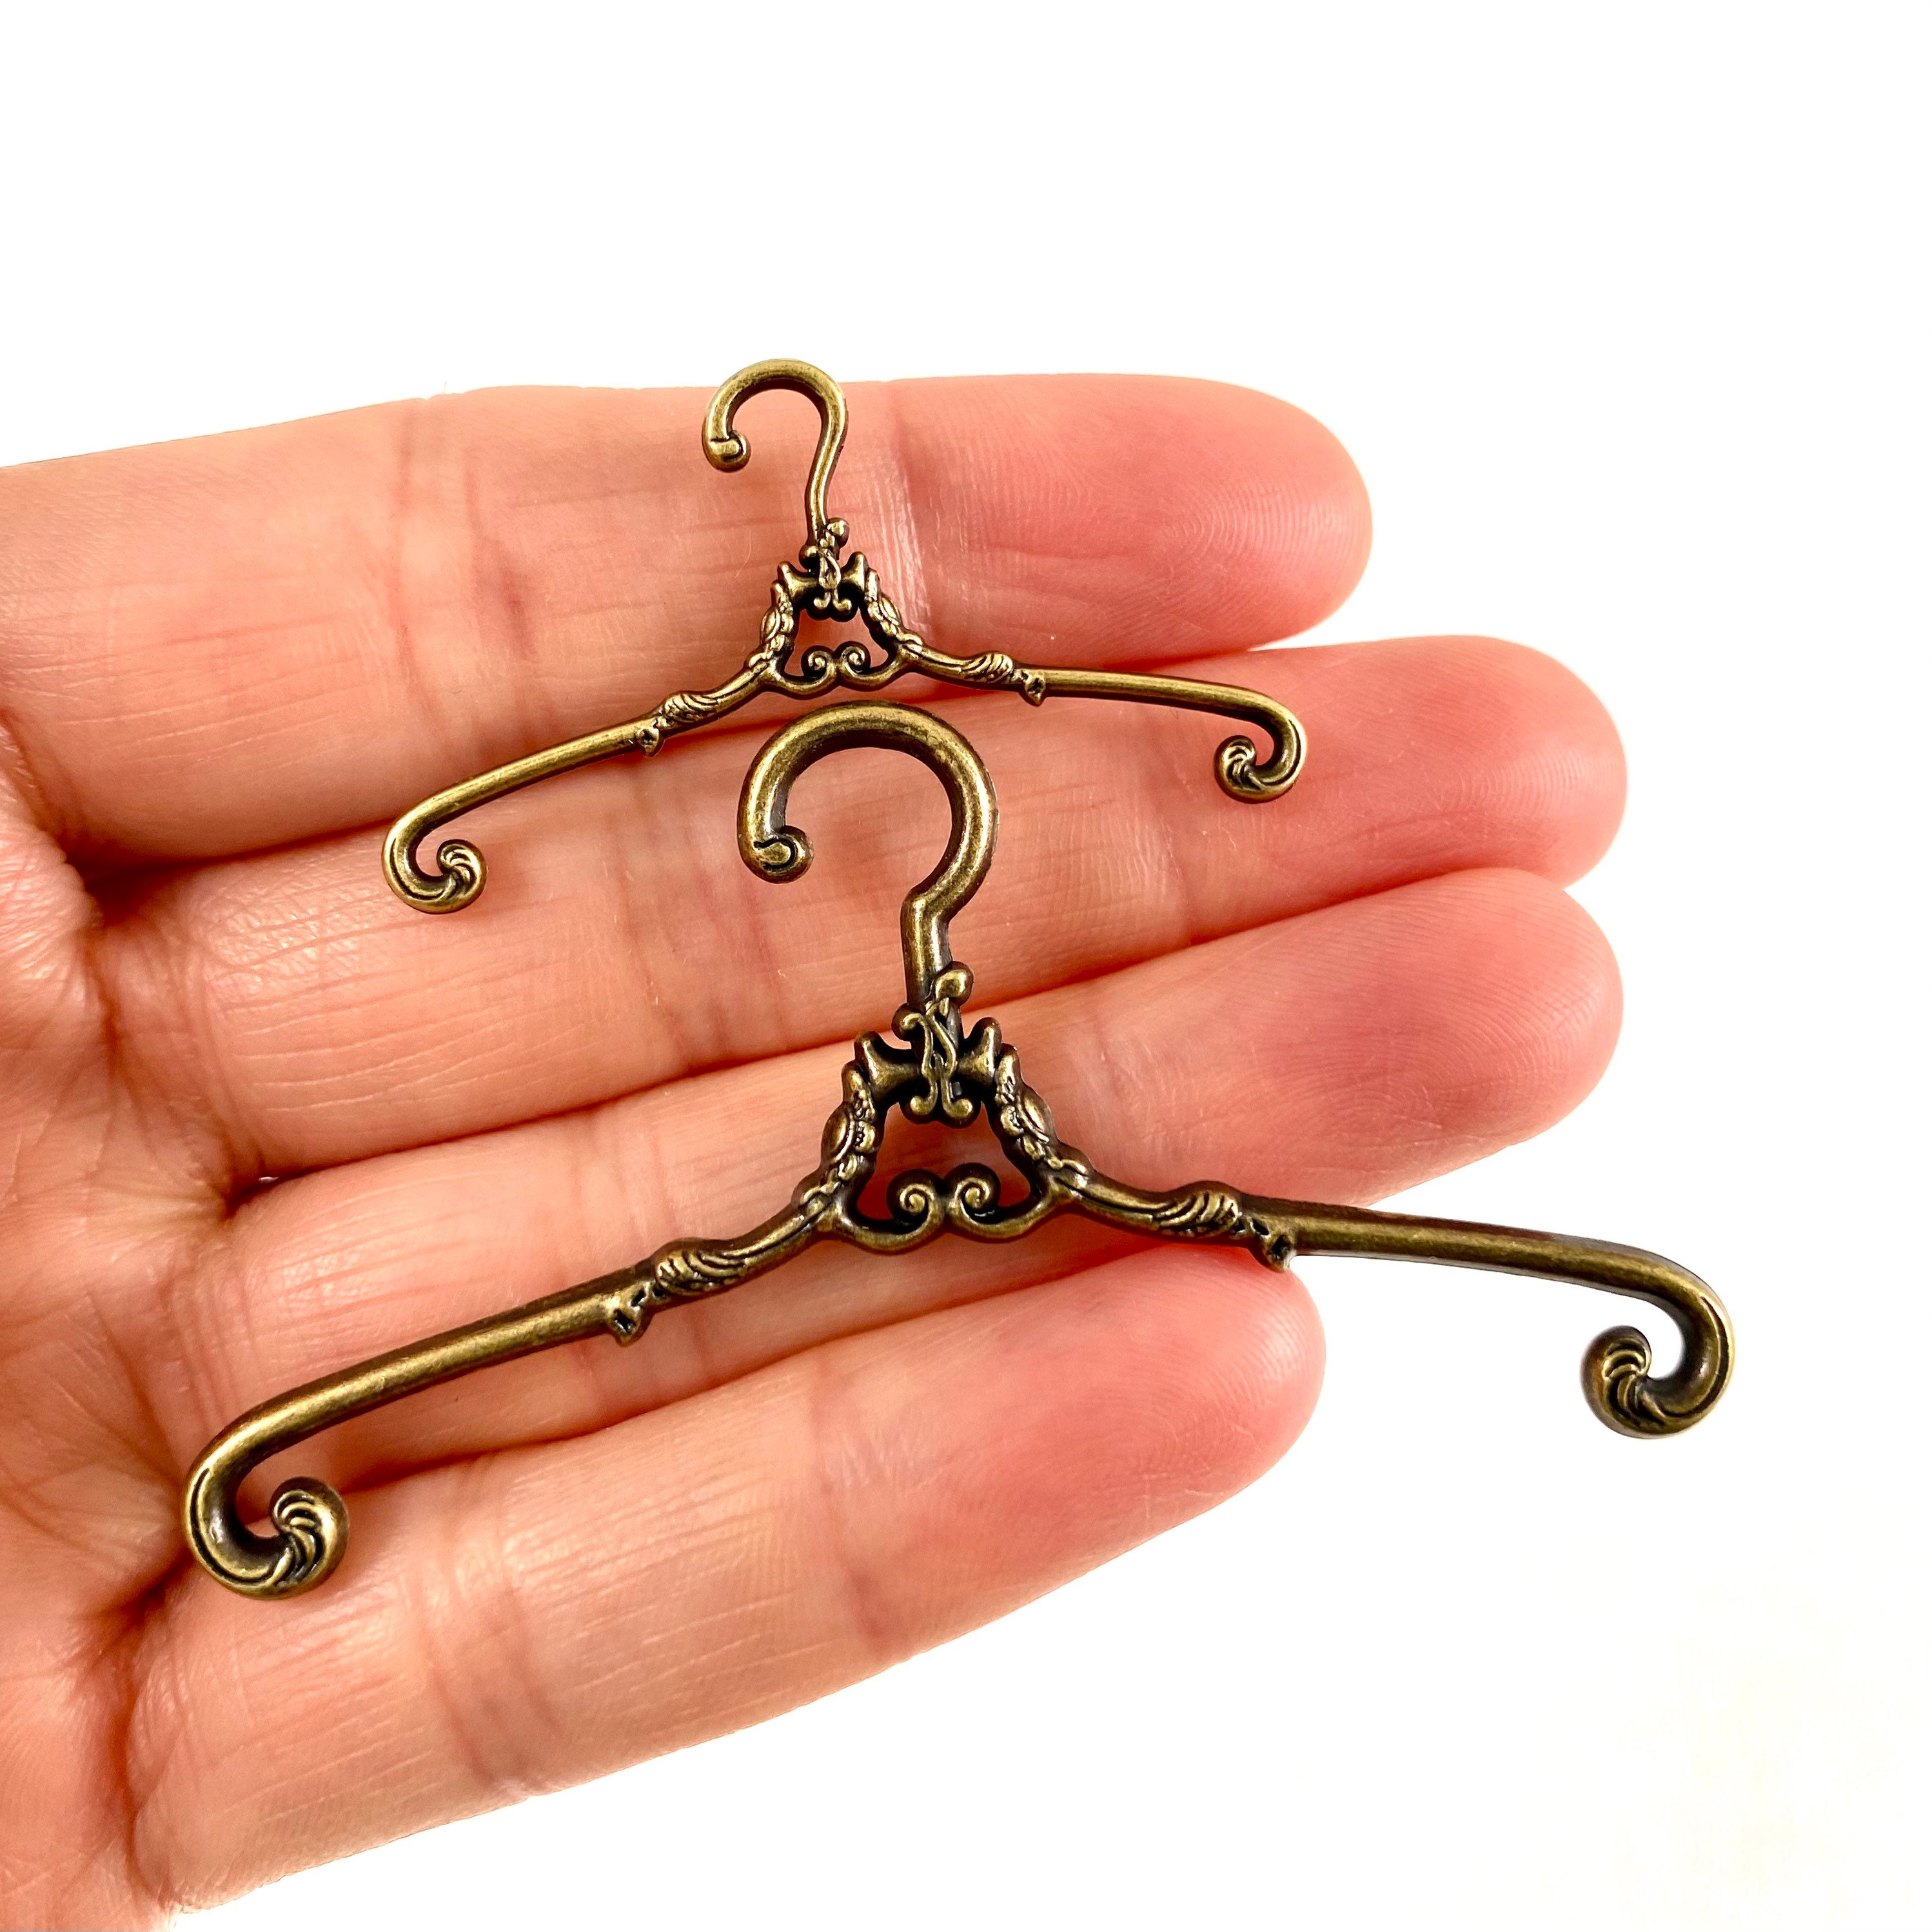 Colonial Store Sign Hanger 1/12 scale dollhouse cast metal miniature ISL2847 